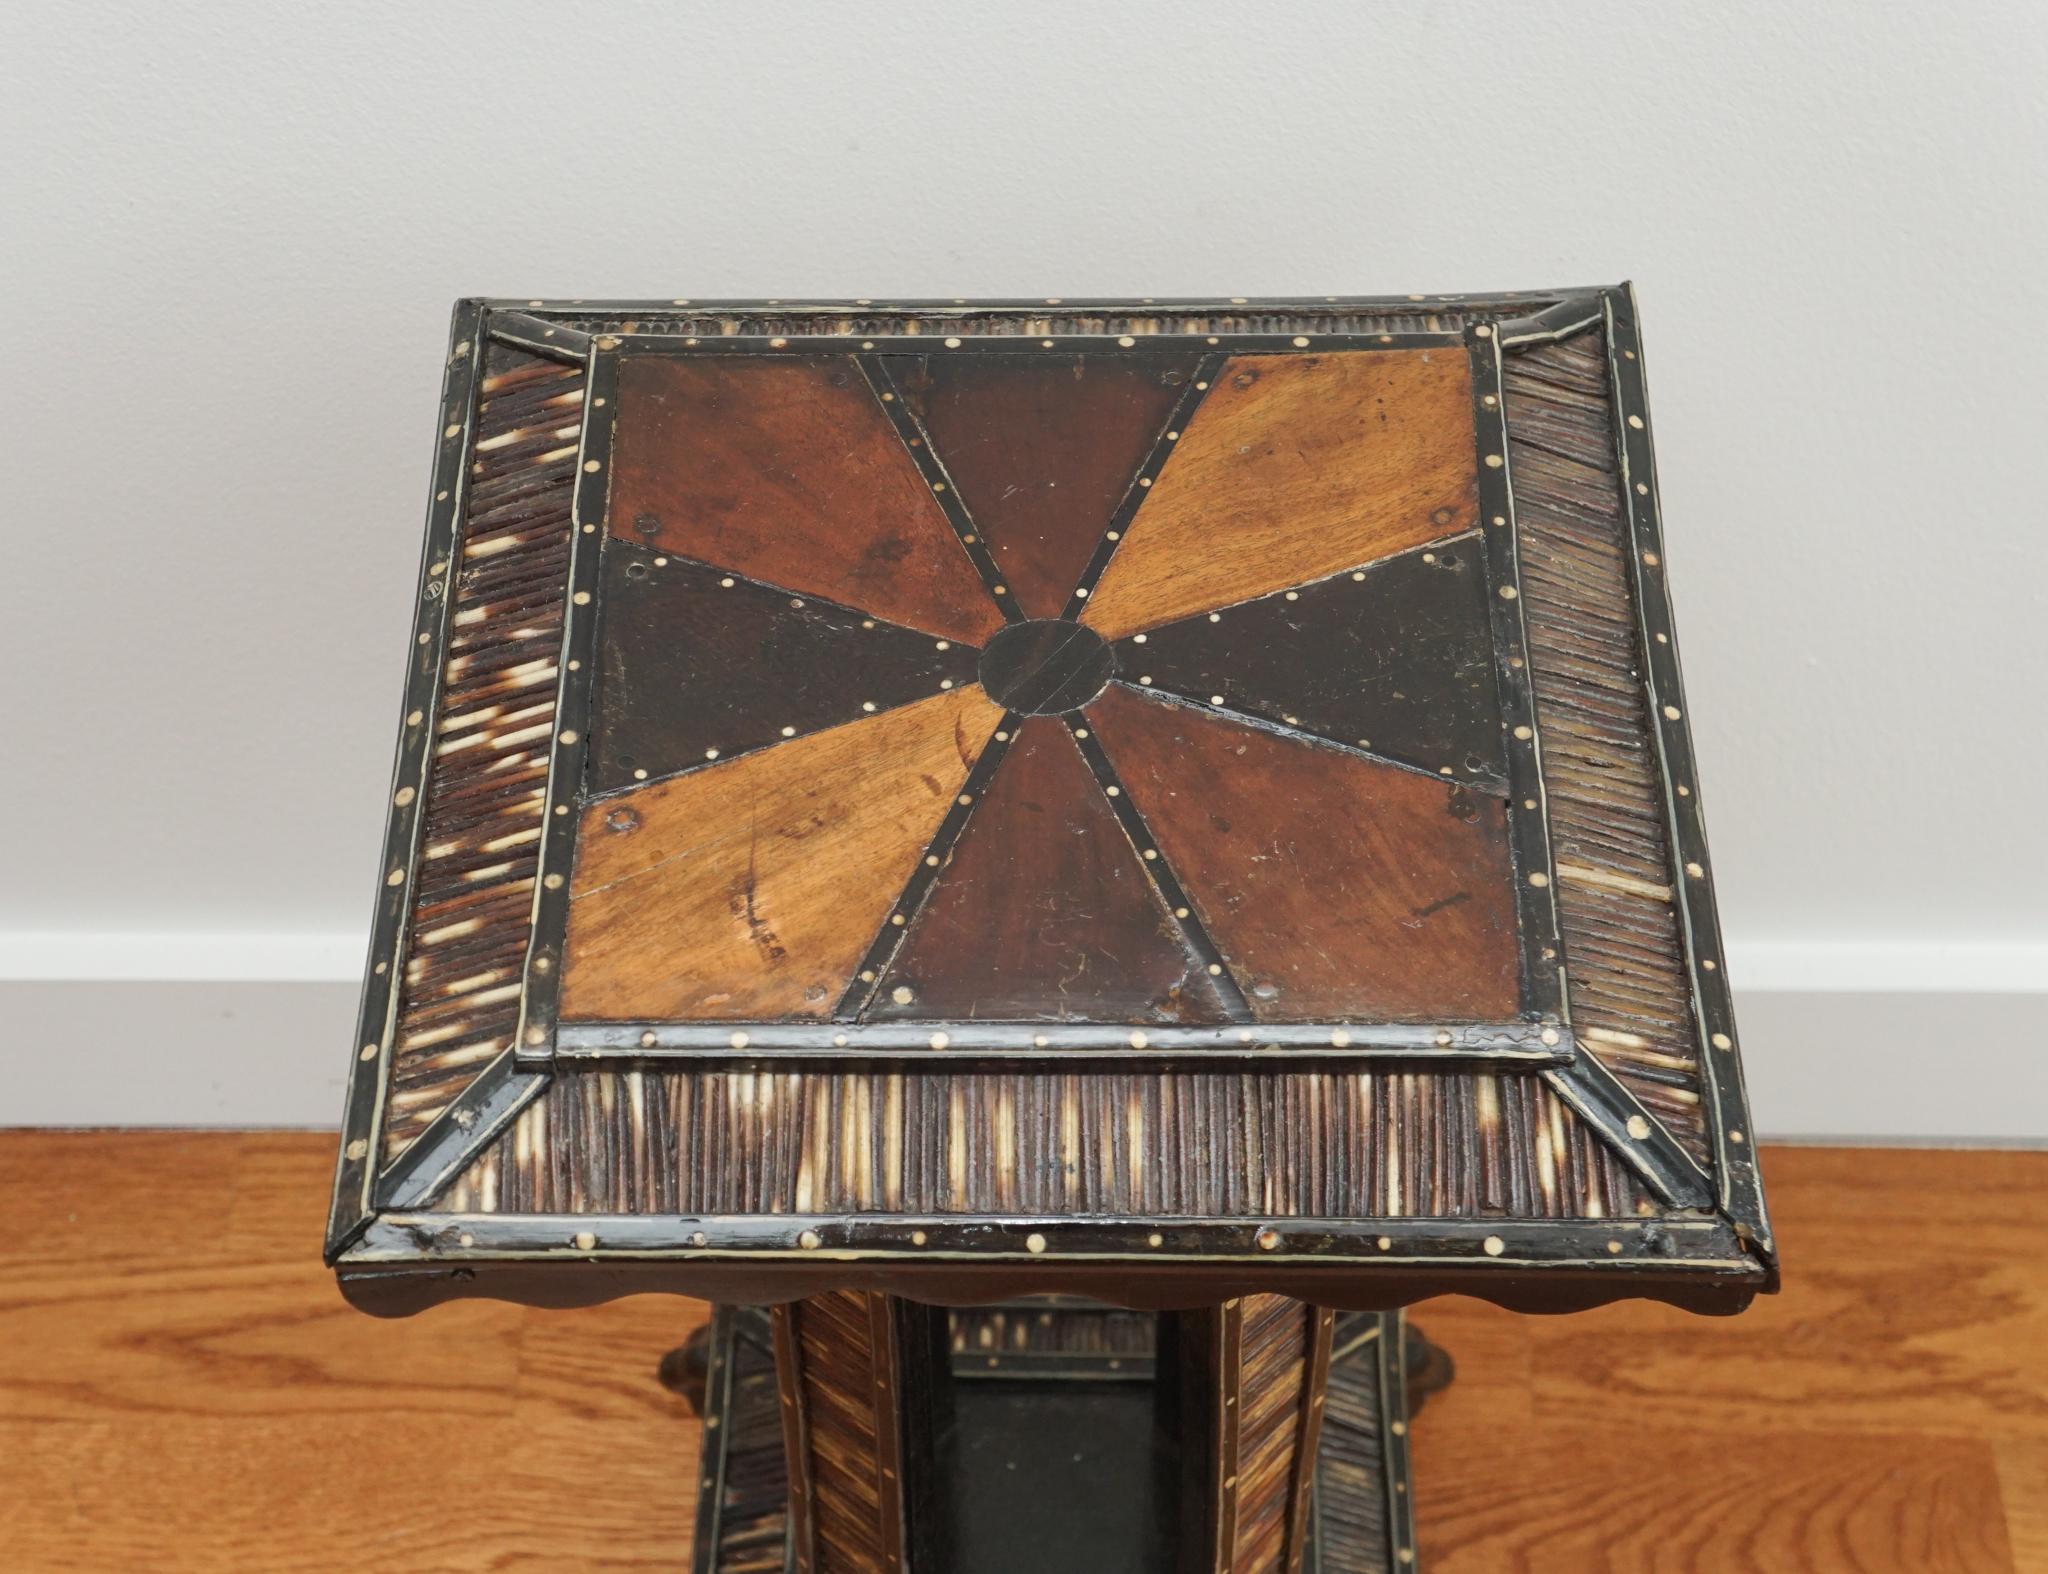 Hand-Crafted Anglo-Indian Accent Table with Ebony and Quill Detailing